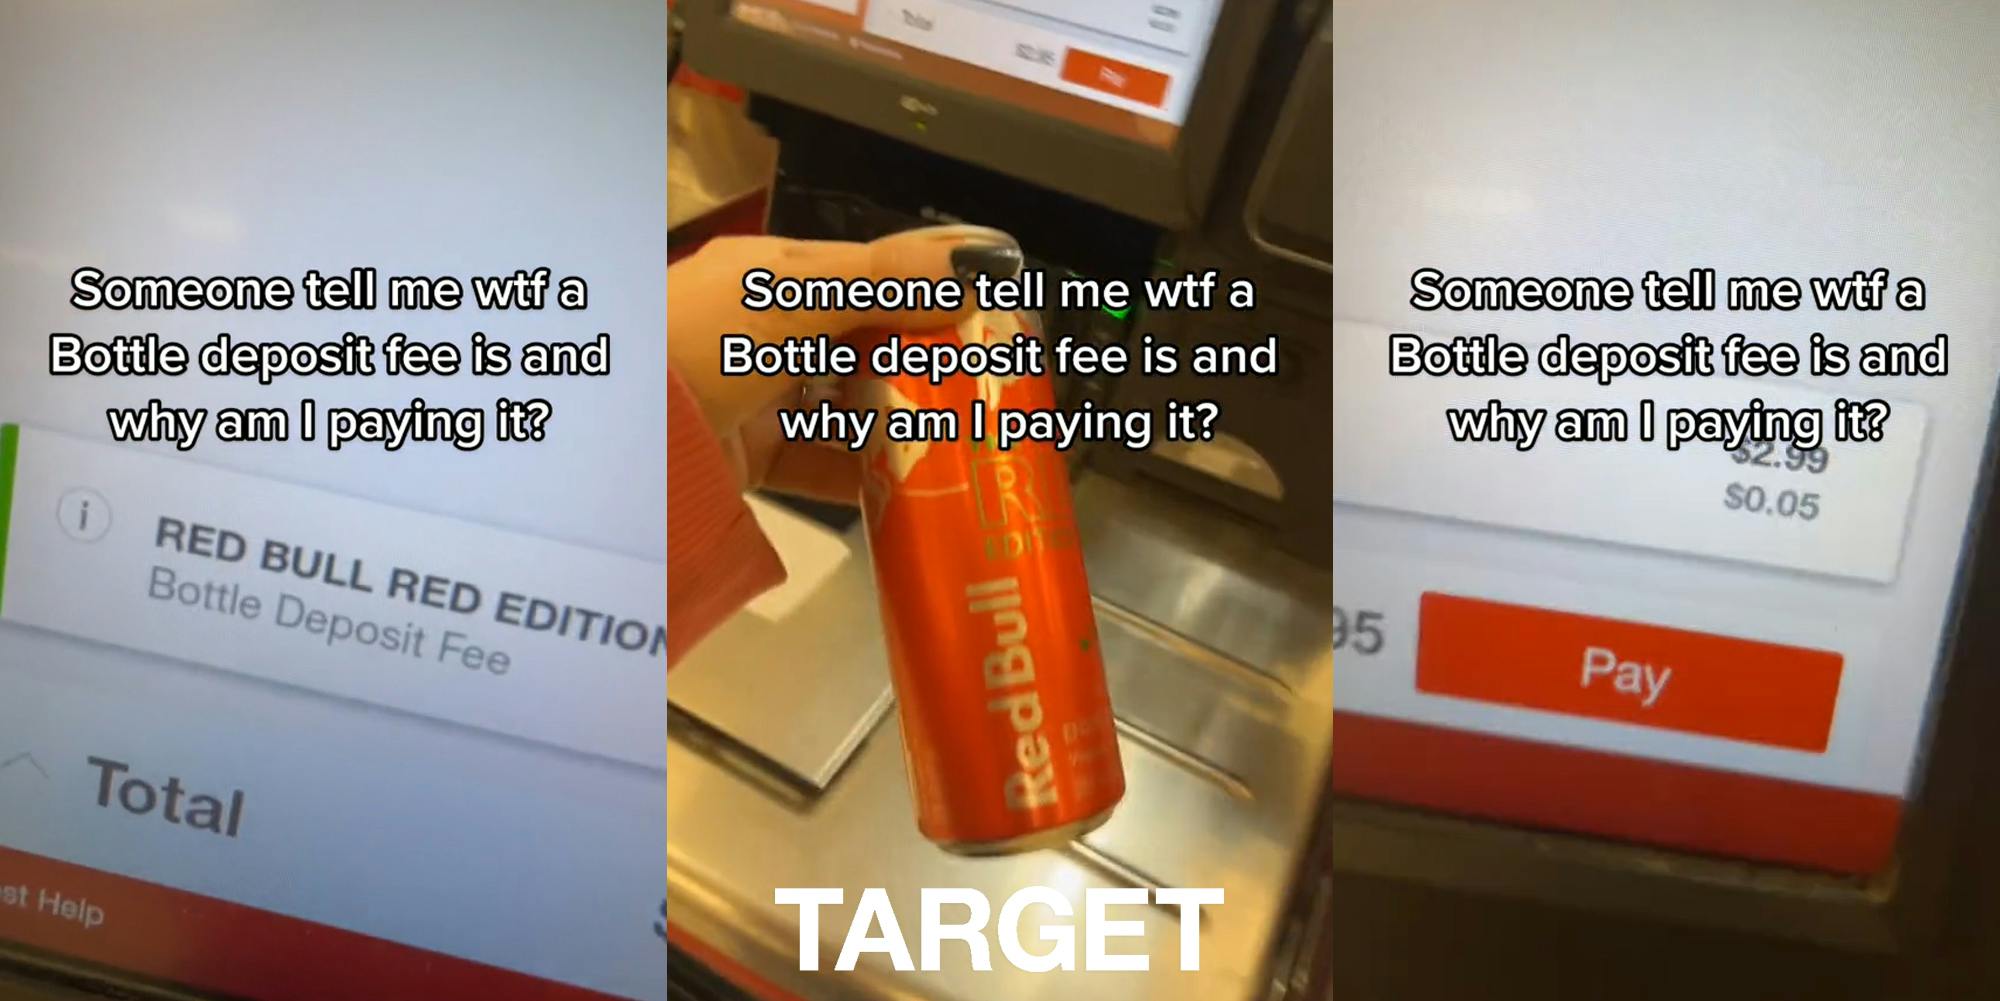 checkout screen "Bottle Deposit Fee" with caption "Someone tell me wtf a Bottle deposit fee is and why am I paying it?" (l) hand holding Red Bull at self checkout with caption "Someone tell me wtf a Bottle deposit fee is and why am I paying it?" with Target logo at bottom (c) checkout screen Bottle Deposit Fee for $0.05 with caption "Someone tell me wtf a Bottle deposit fee is and why am I paying it?" (r)